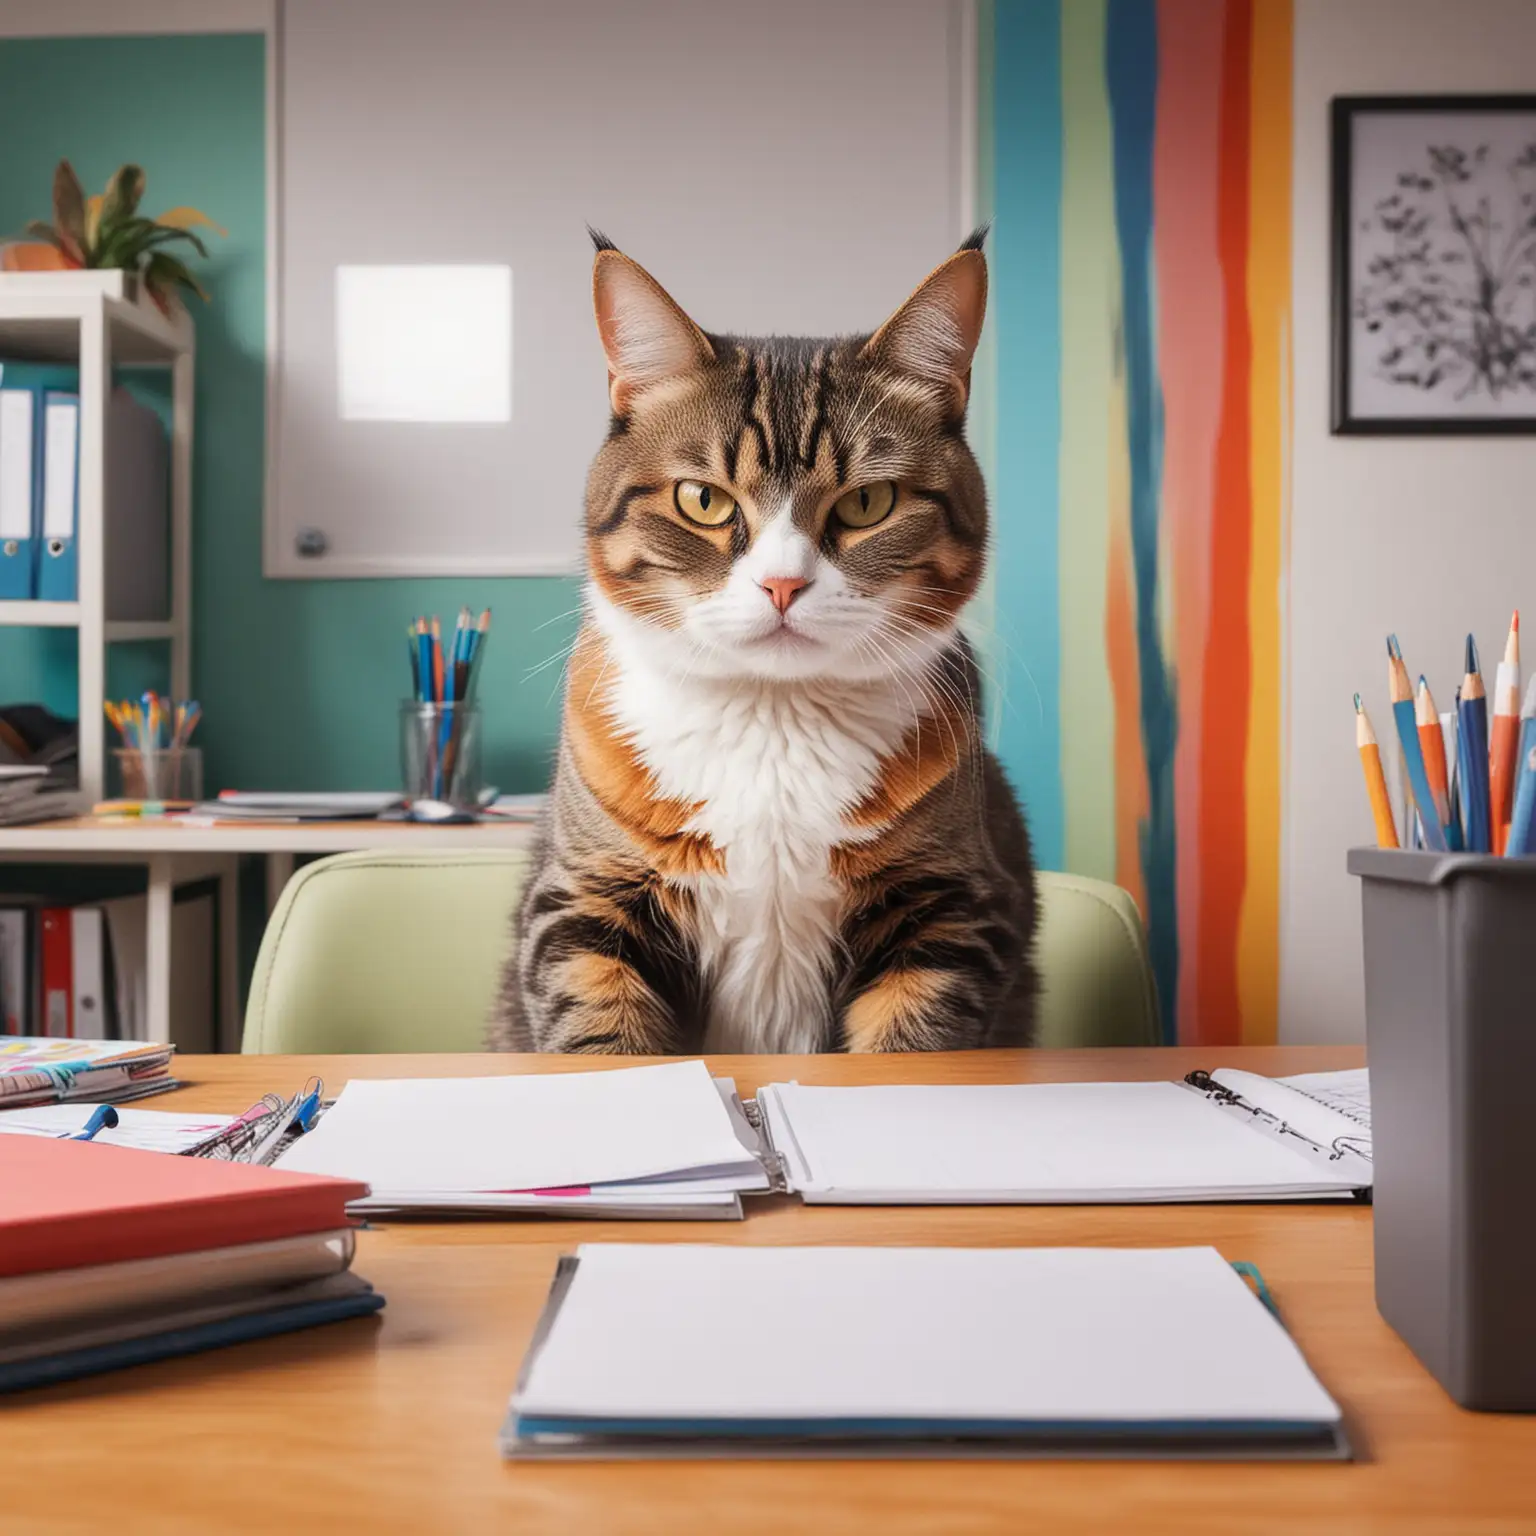 Angry Cat in Vibrant Office Environment